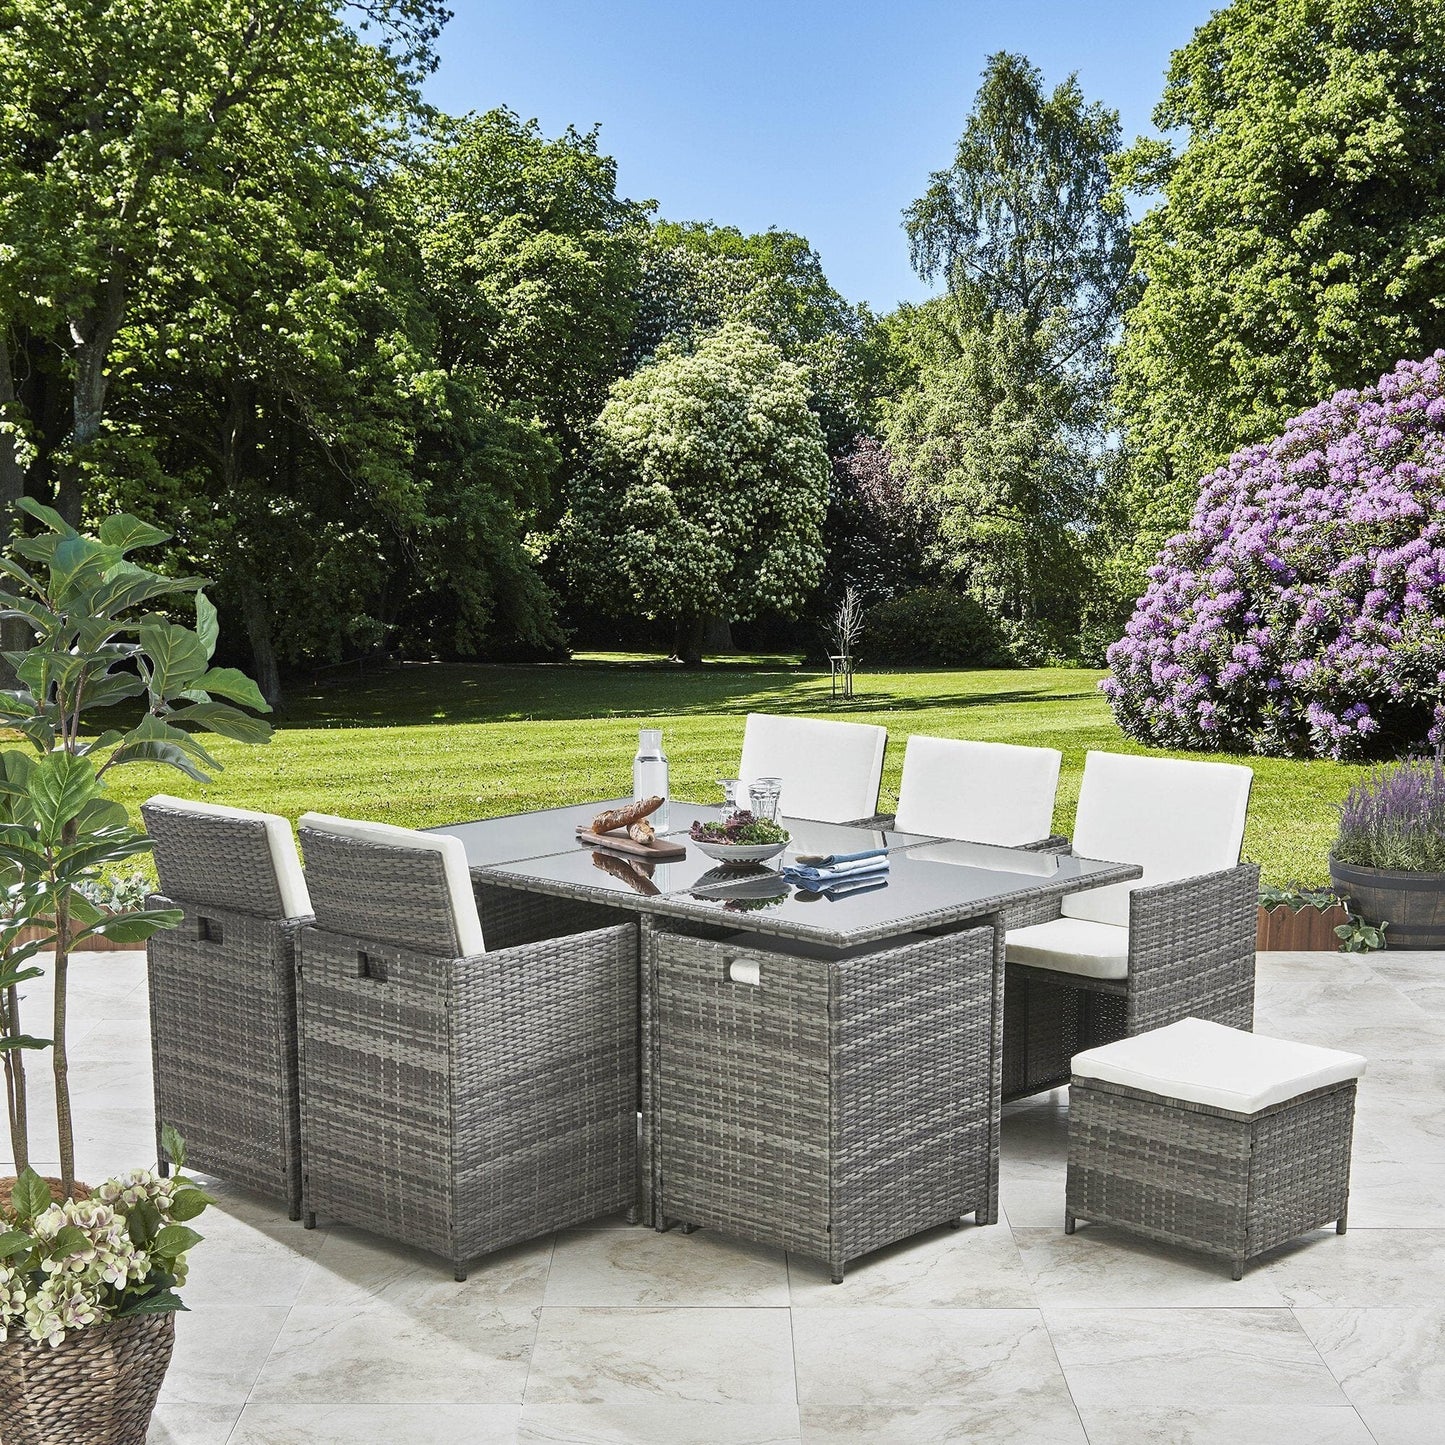 10 Seater Rattan Cube Garden Set with Grey Parasol - Outdoor Dining Furniture - (Grey Weave)